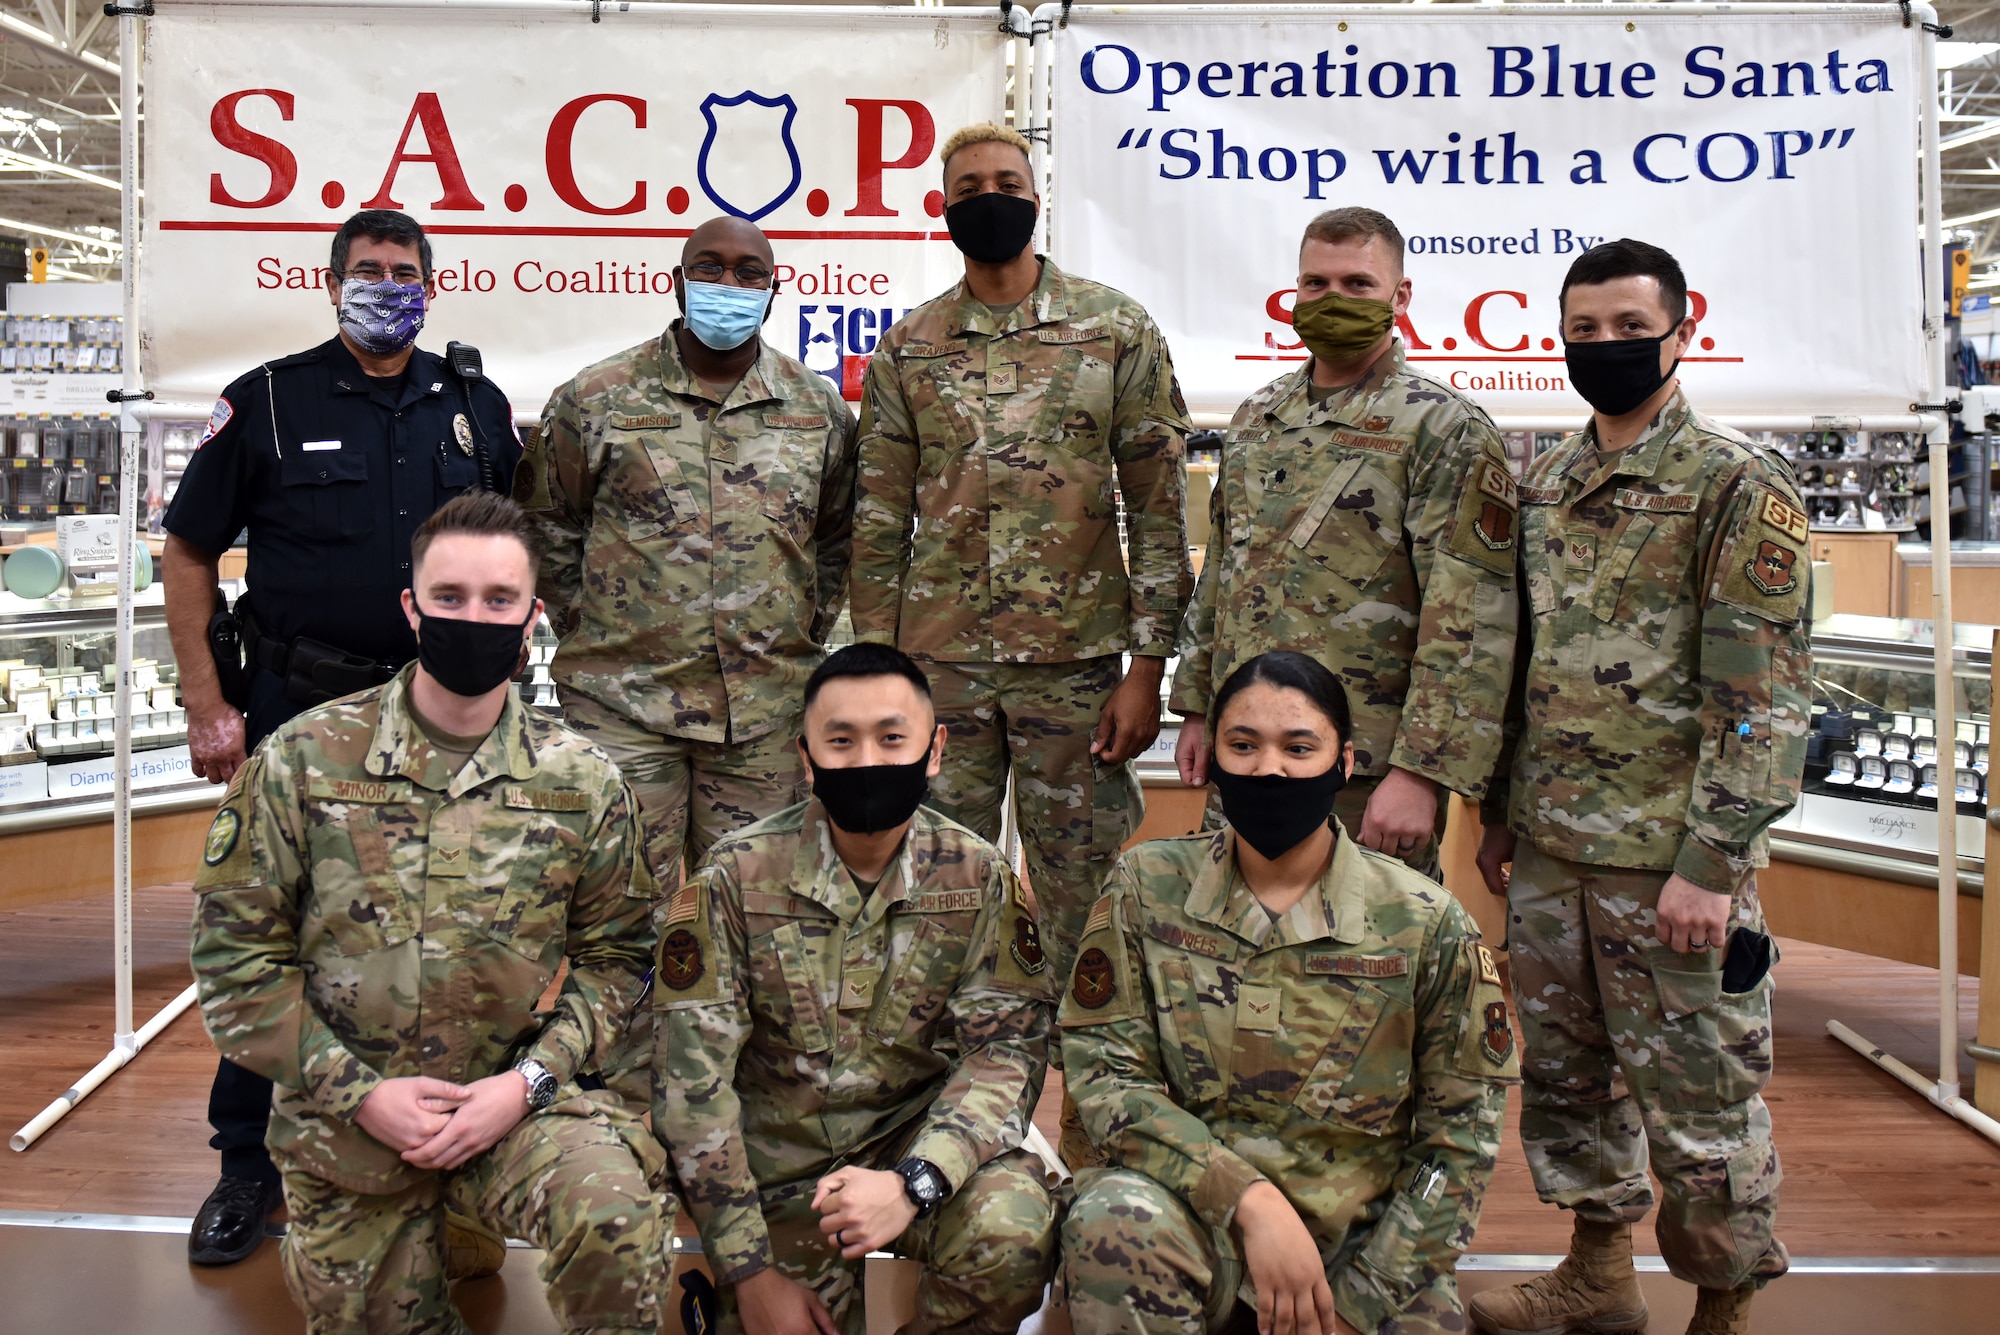 A San Angelo Police Officer poses with volunteers from the 17th Security Forces Squadron at the 13th Annual Operation Blue Santa event in San Angelo, Texas, Dec. 12, 2020. This is the second year that Goodfellow members participated in the event. (U.S. Air Force photo by Staff Sgt. Seraiah Wolf)